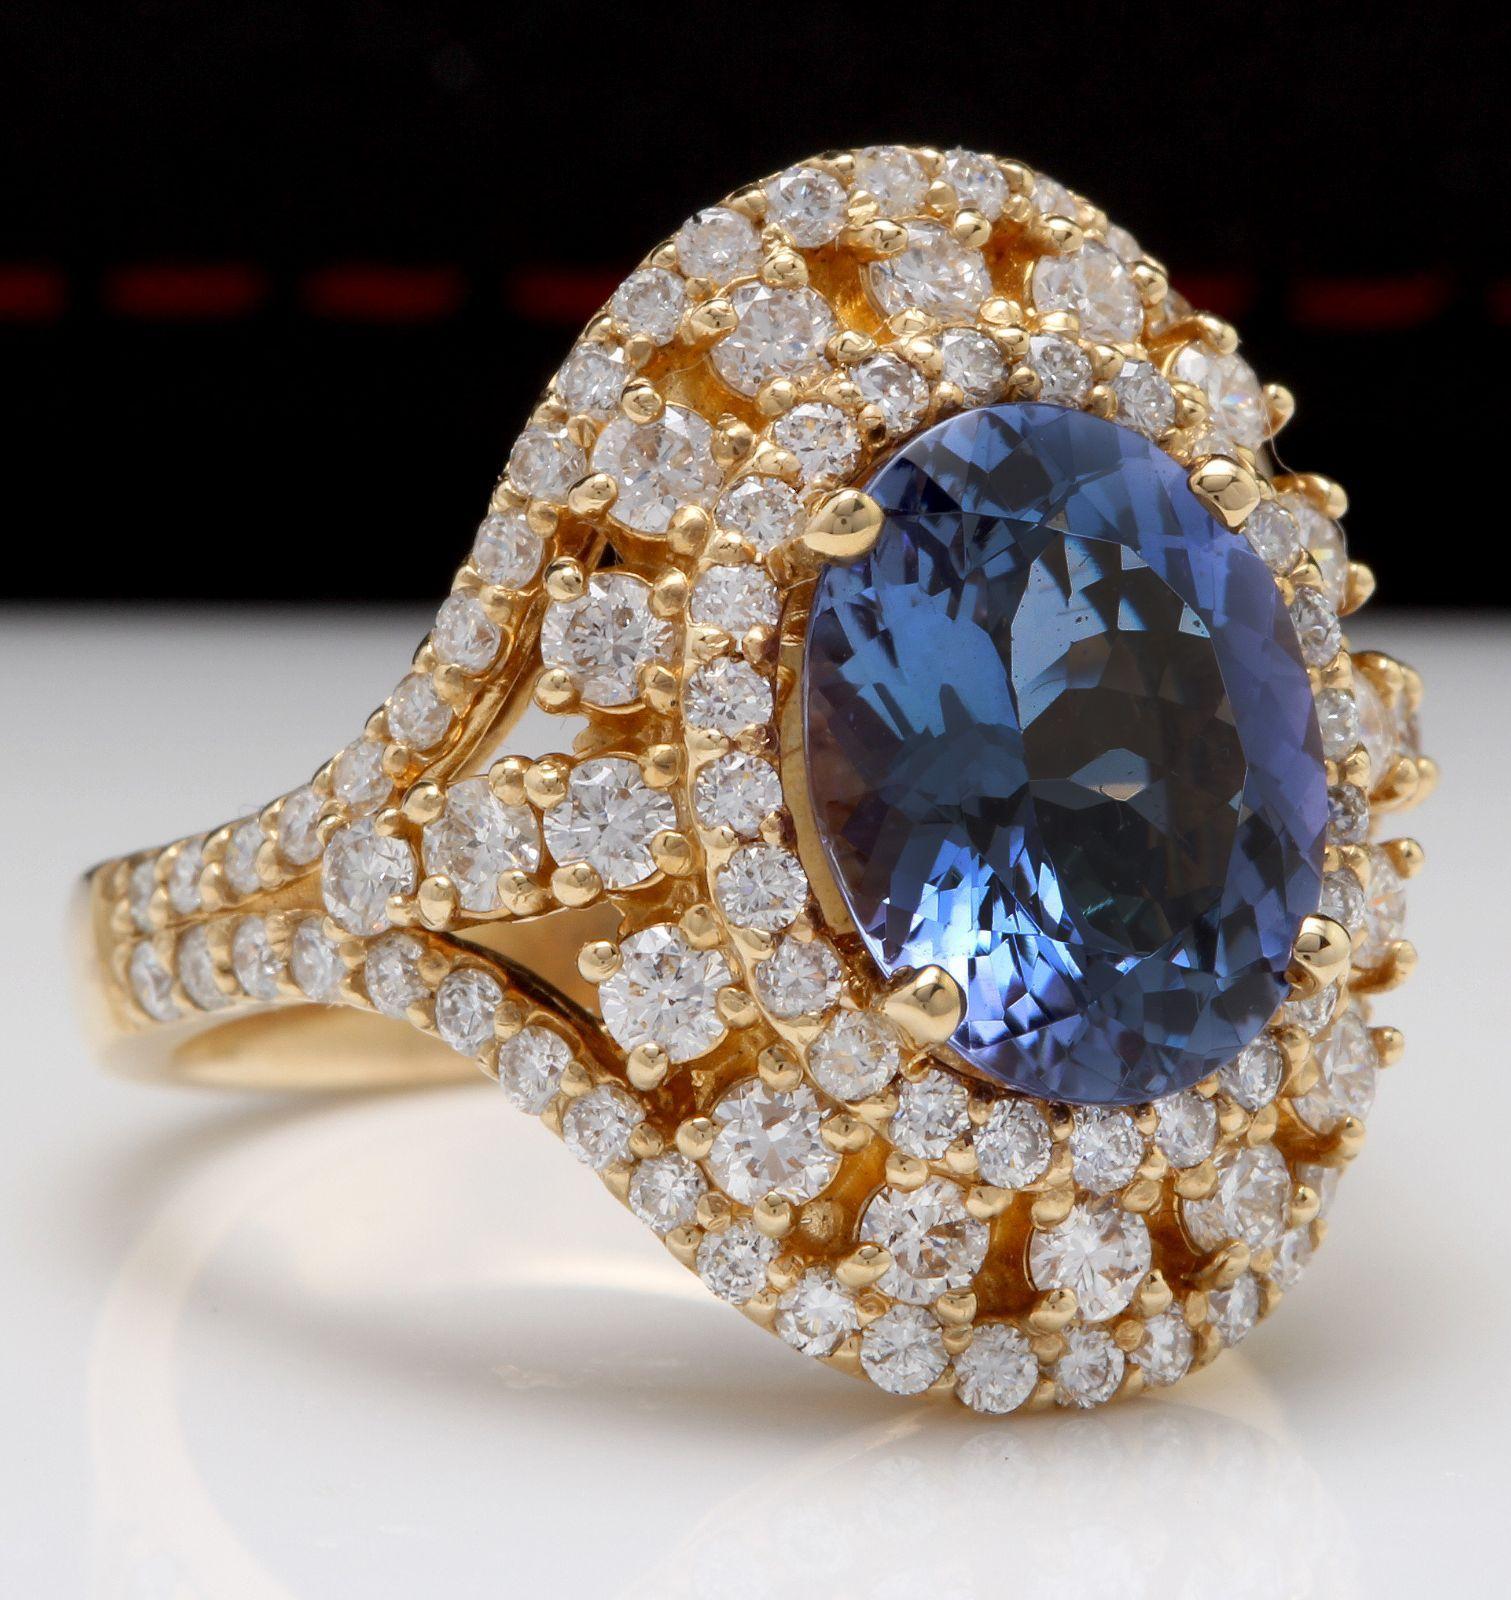 5.00 Carats Natural Splendid Tanzanite and Diamond 14K Solid Yellow Gold Ring

Total Natural Oval Cut Tanzanite Weight is: Approx. 3.50 Carats

Natural Round Diamonds Weight: Approx. 1.50 Carats (color G-H / Clarity SI1-2)

Ring size: 7 (we offer